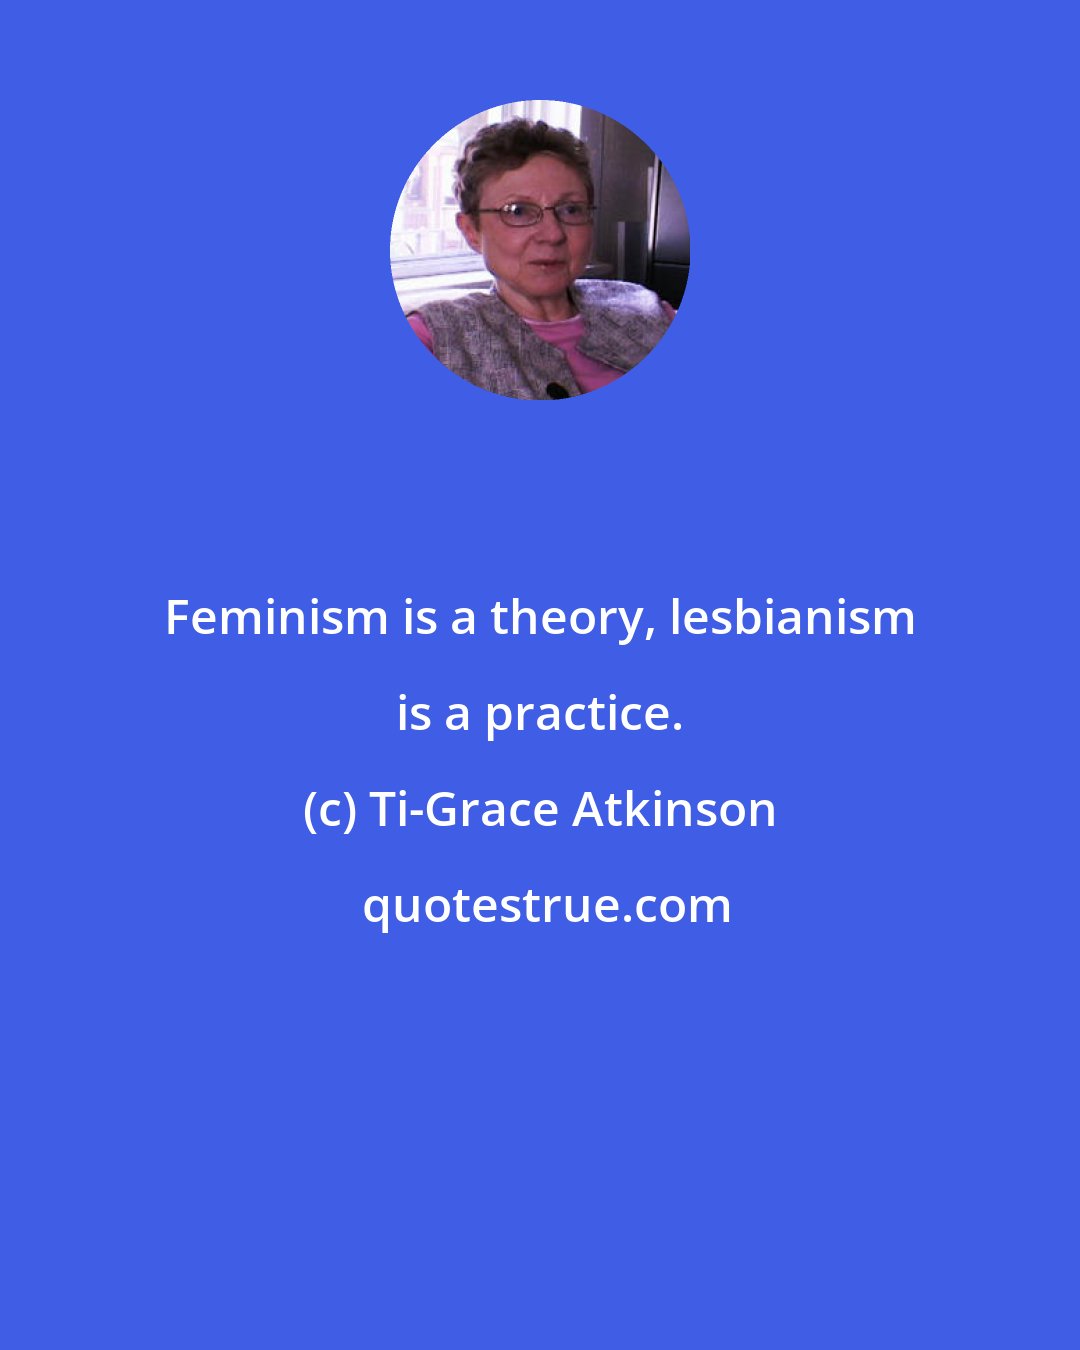 Ti-Grace Atkinson: Feminism is a theory, lesbianism is a practice.